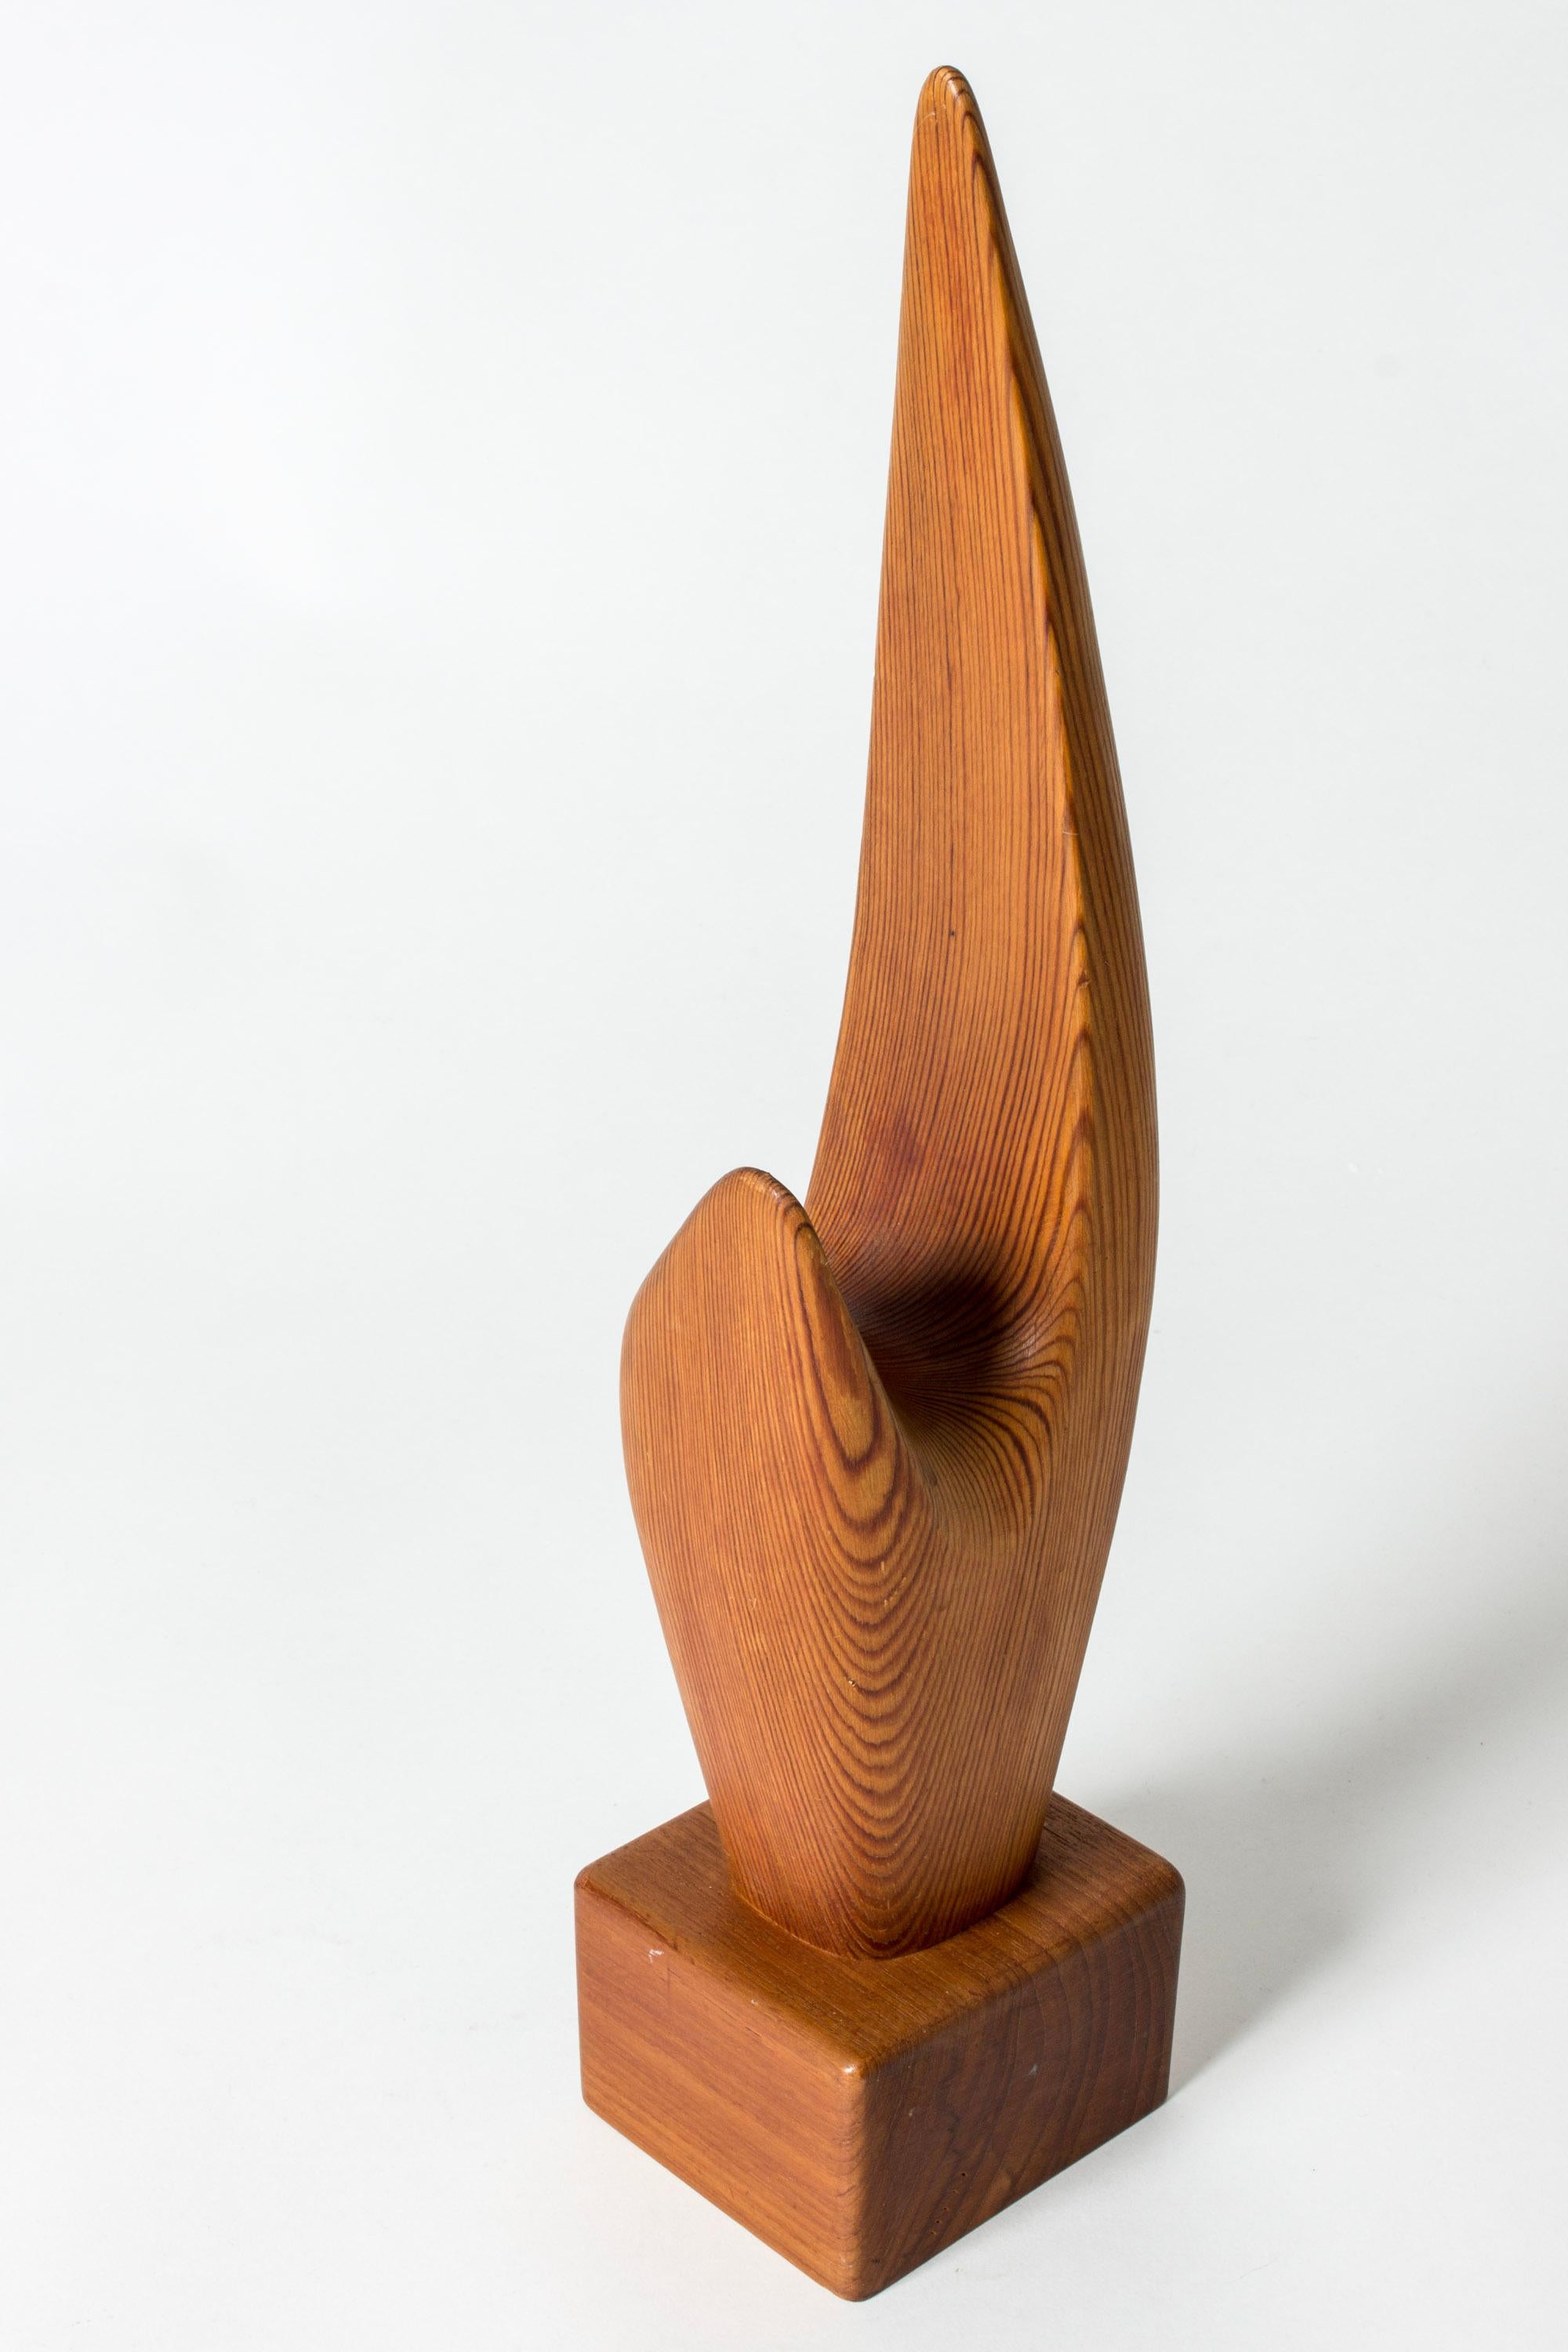 Swedish Midcentury Wooden Abstract Sculpture by Johnny Mattsson, Sweden, 1962 For Sale